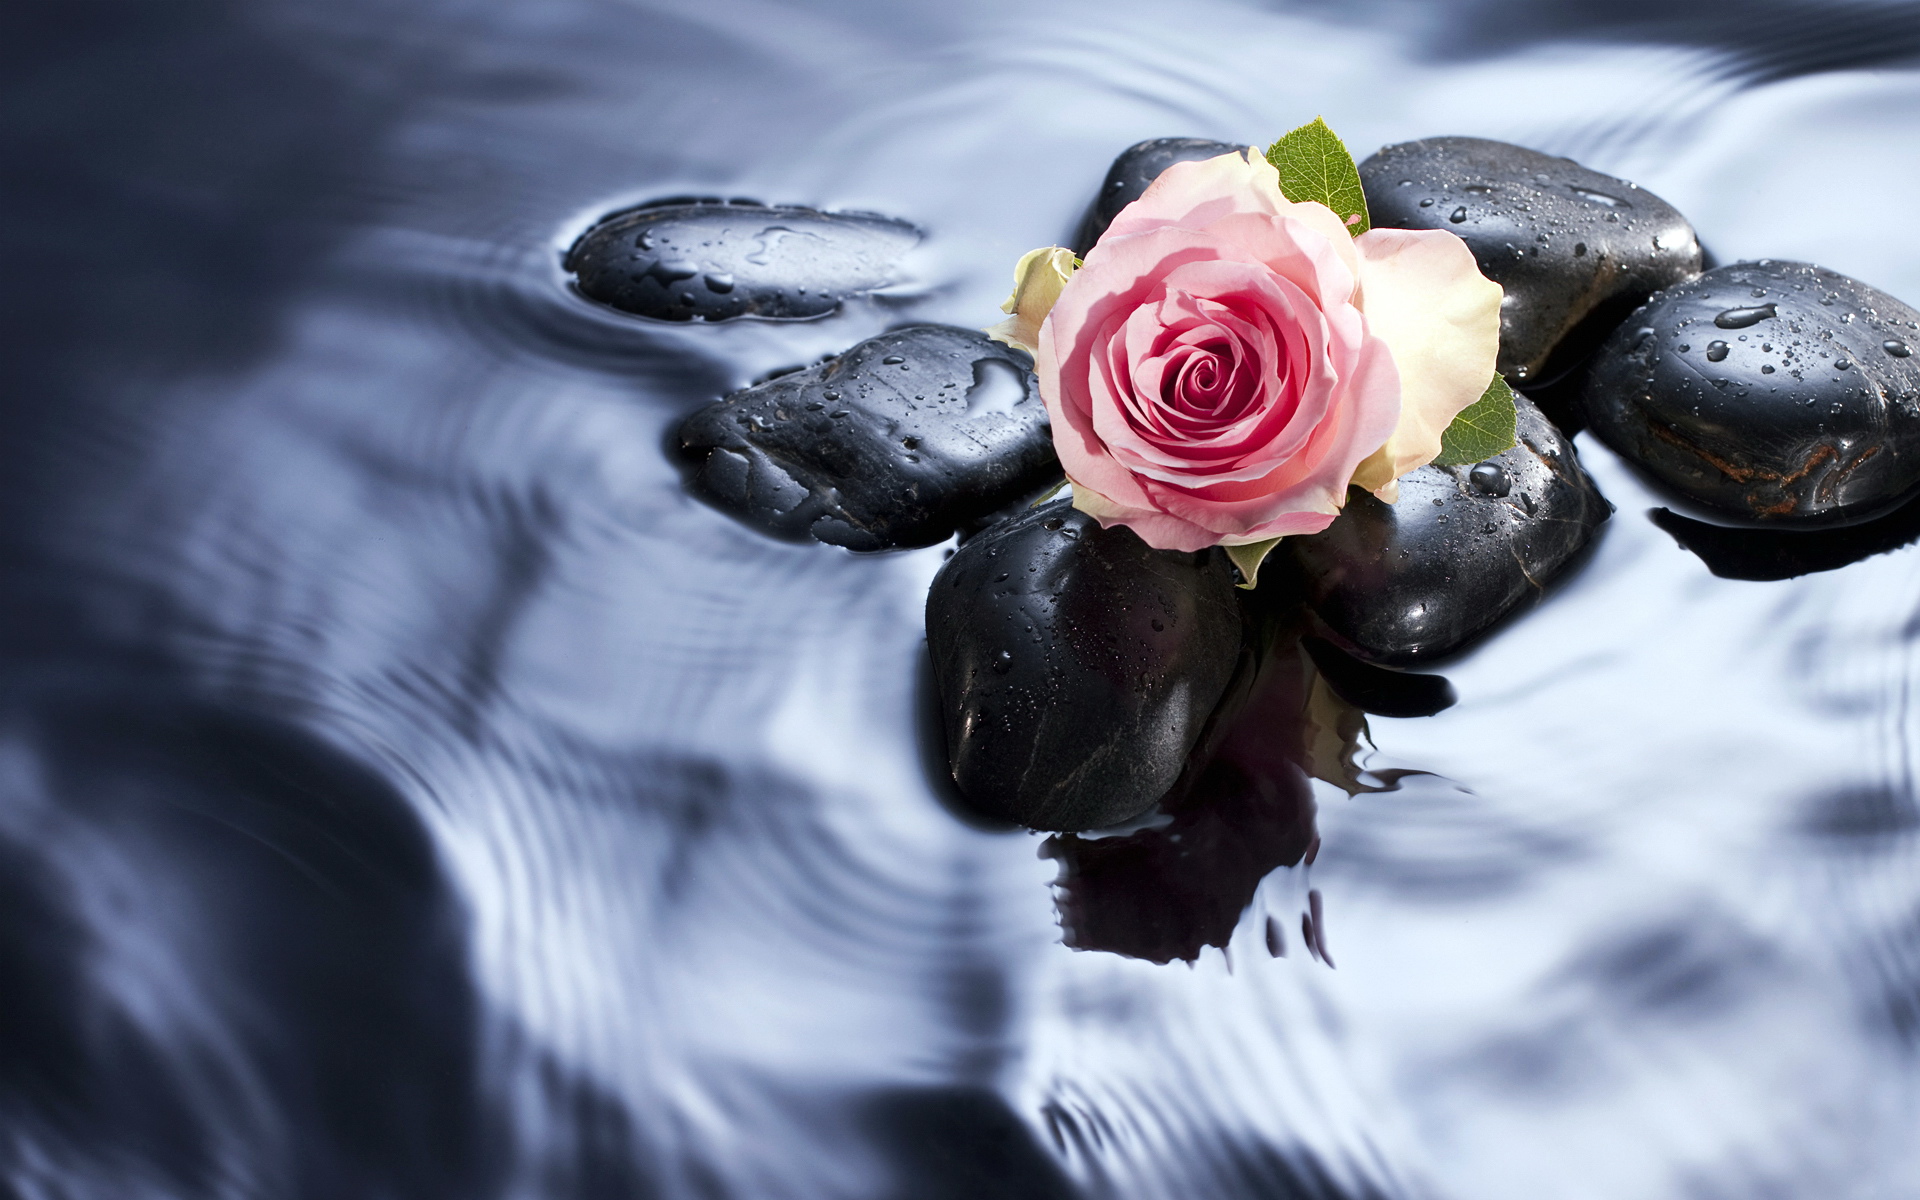 photography, artistic, bud, rose, stone, water